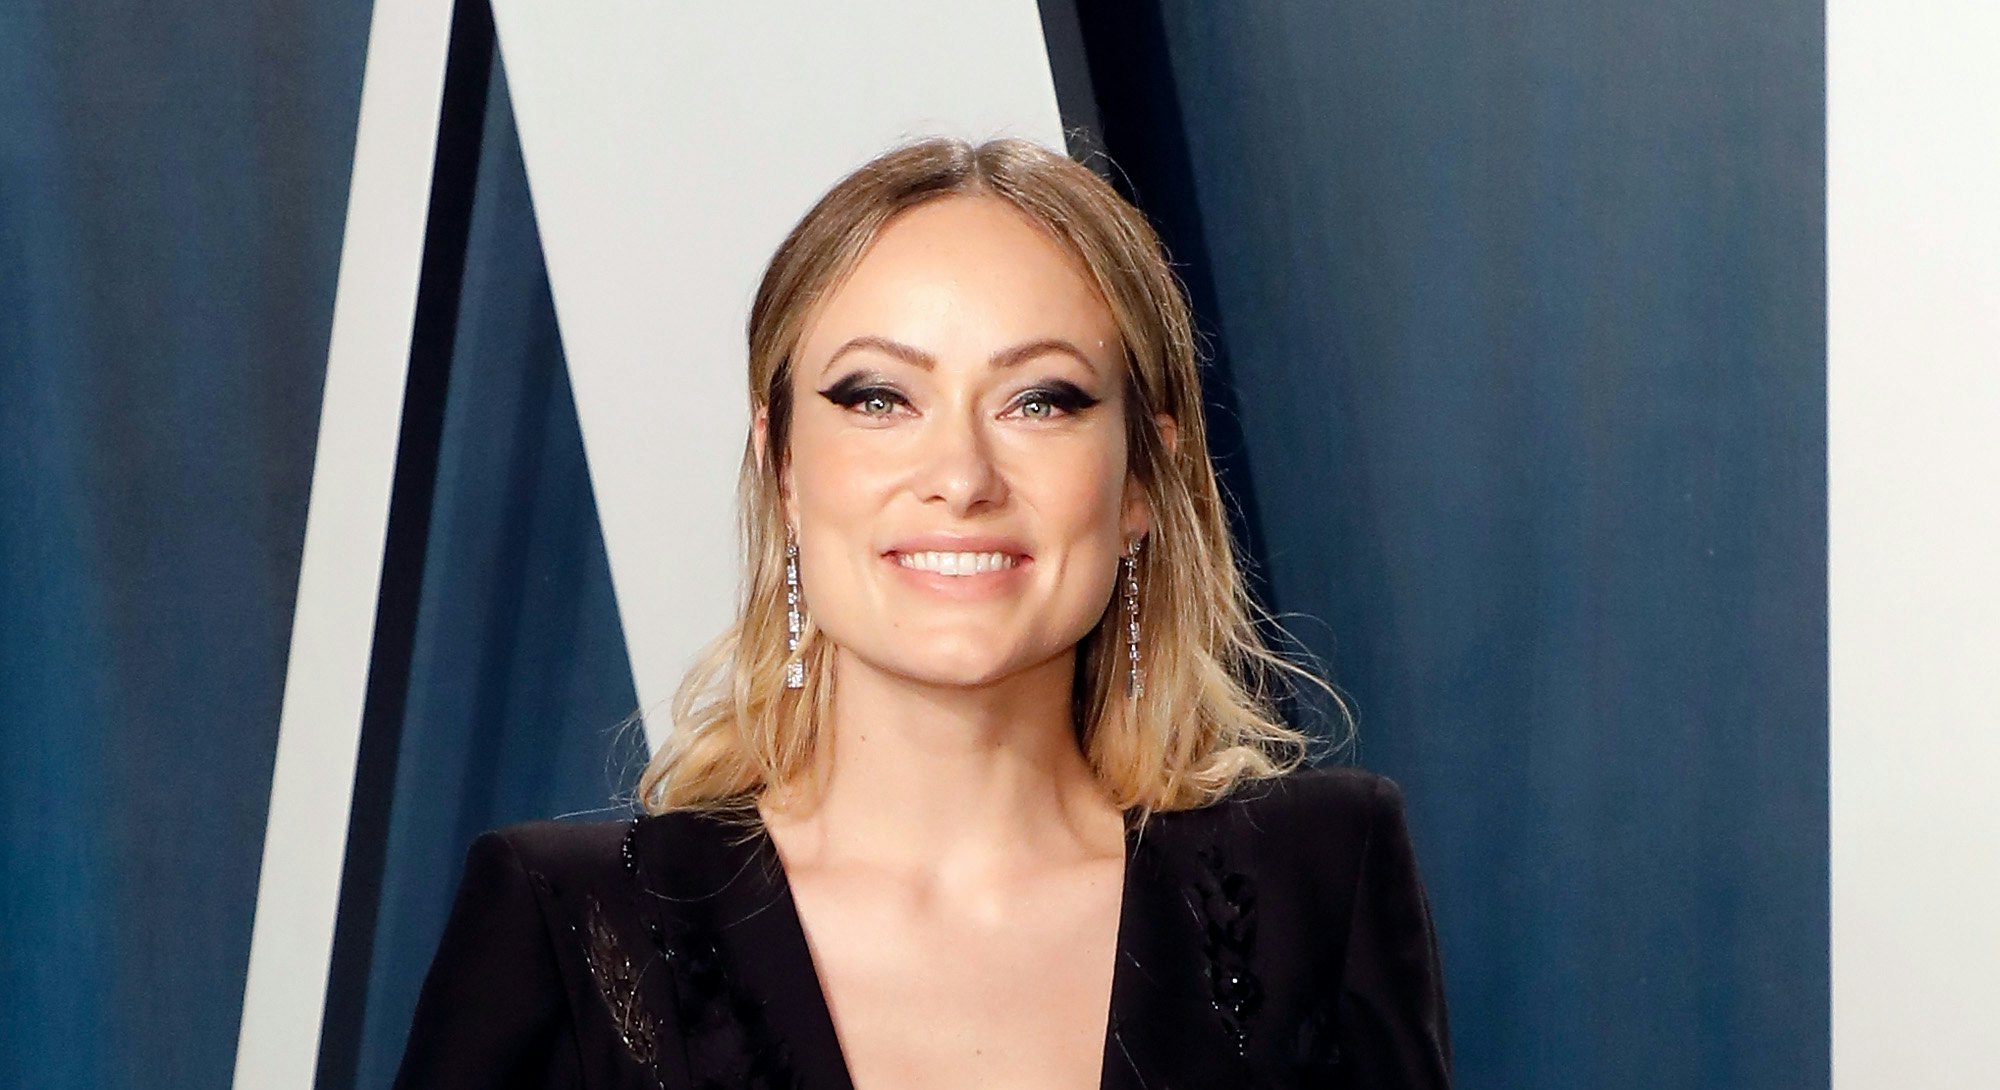 BEVERLY HILLS, CALIFORNIA - FEBRUARY 09: Olivia Wilde attends the 2020 Vanity Fair Oscar Party at Wa...